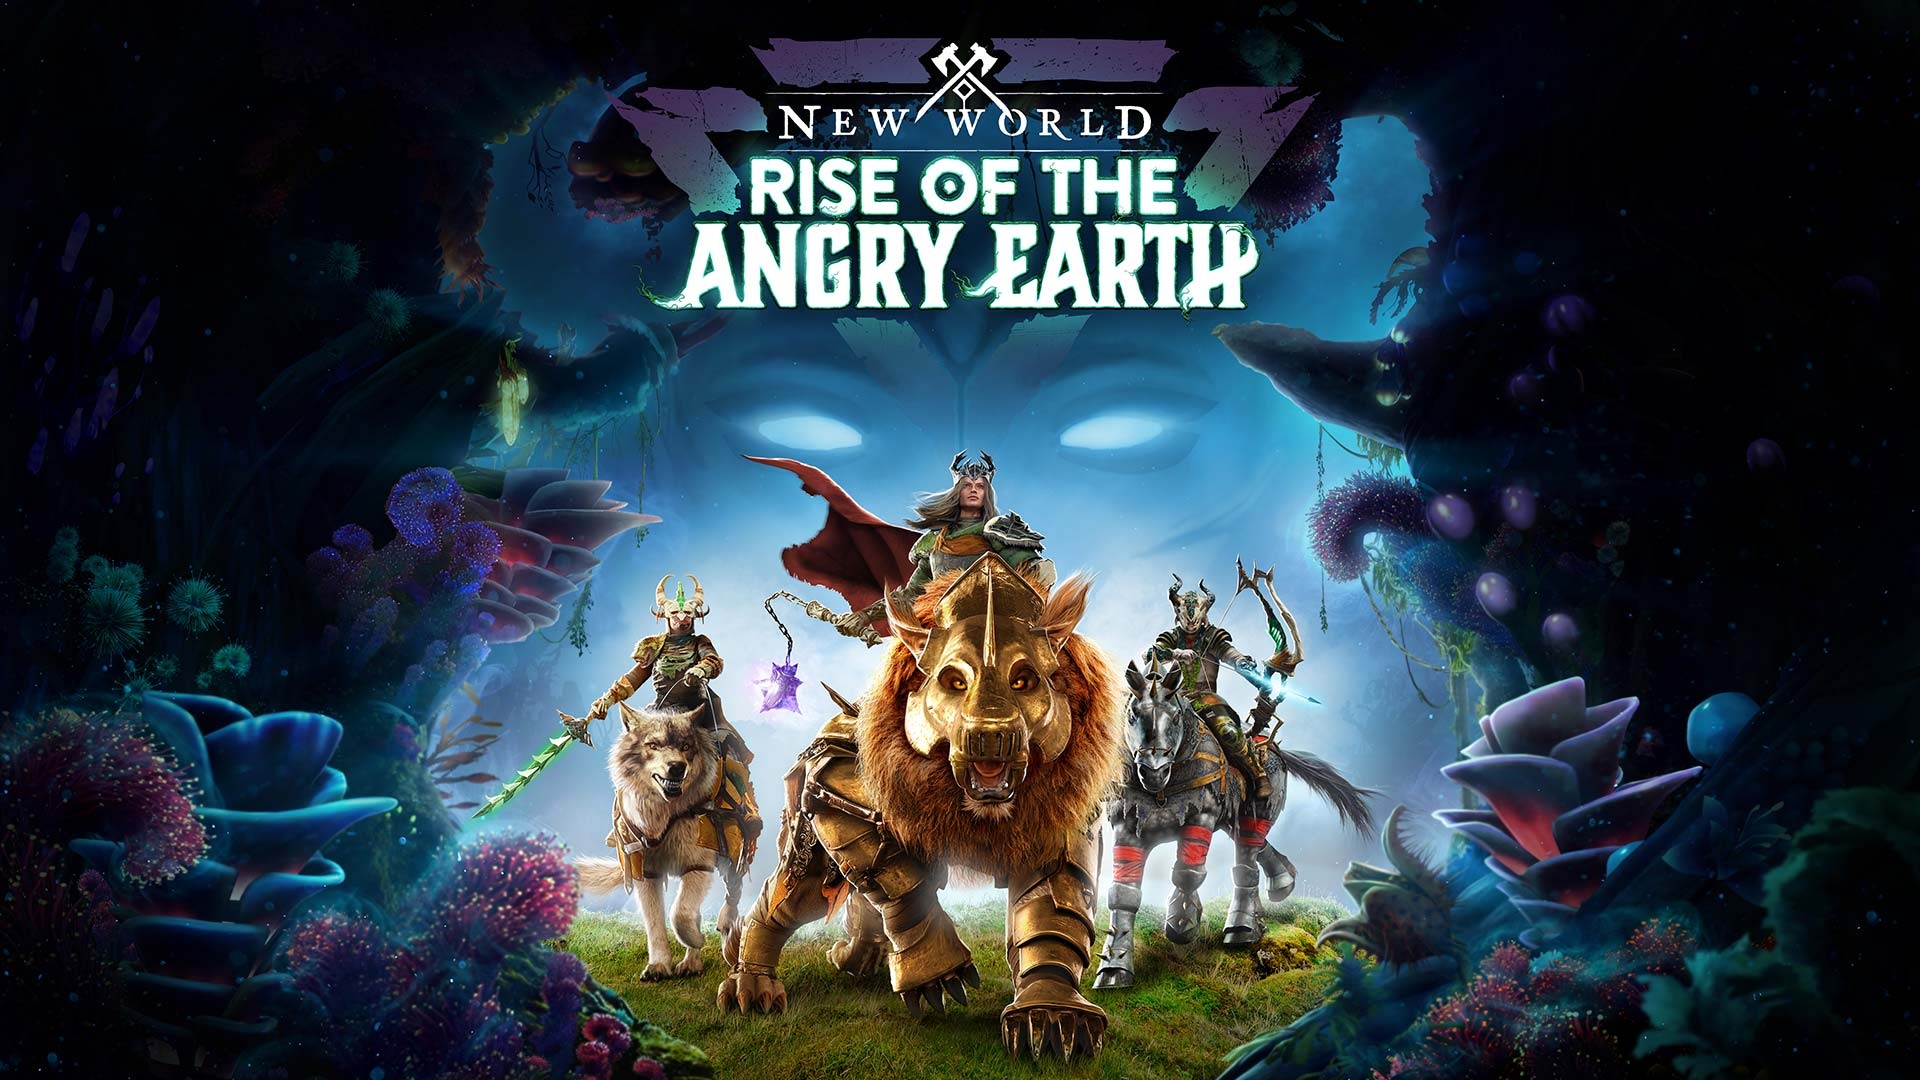 New World Launch Details - News  New World - Open World MMO PC Game